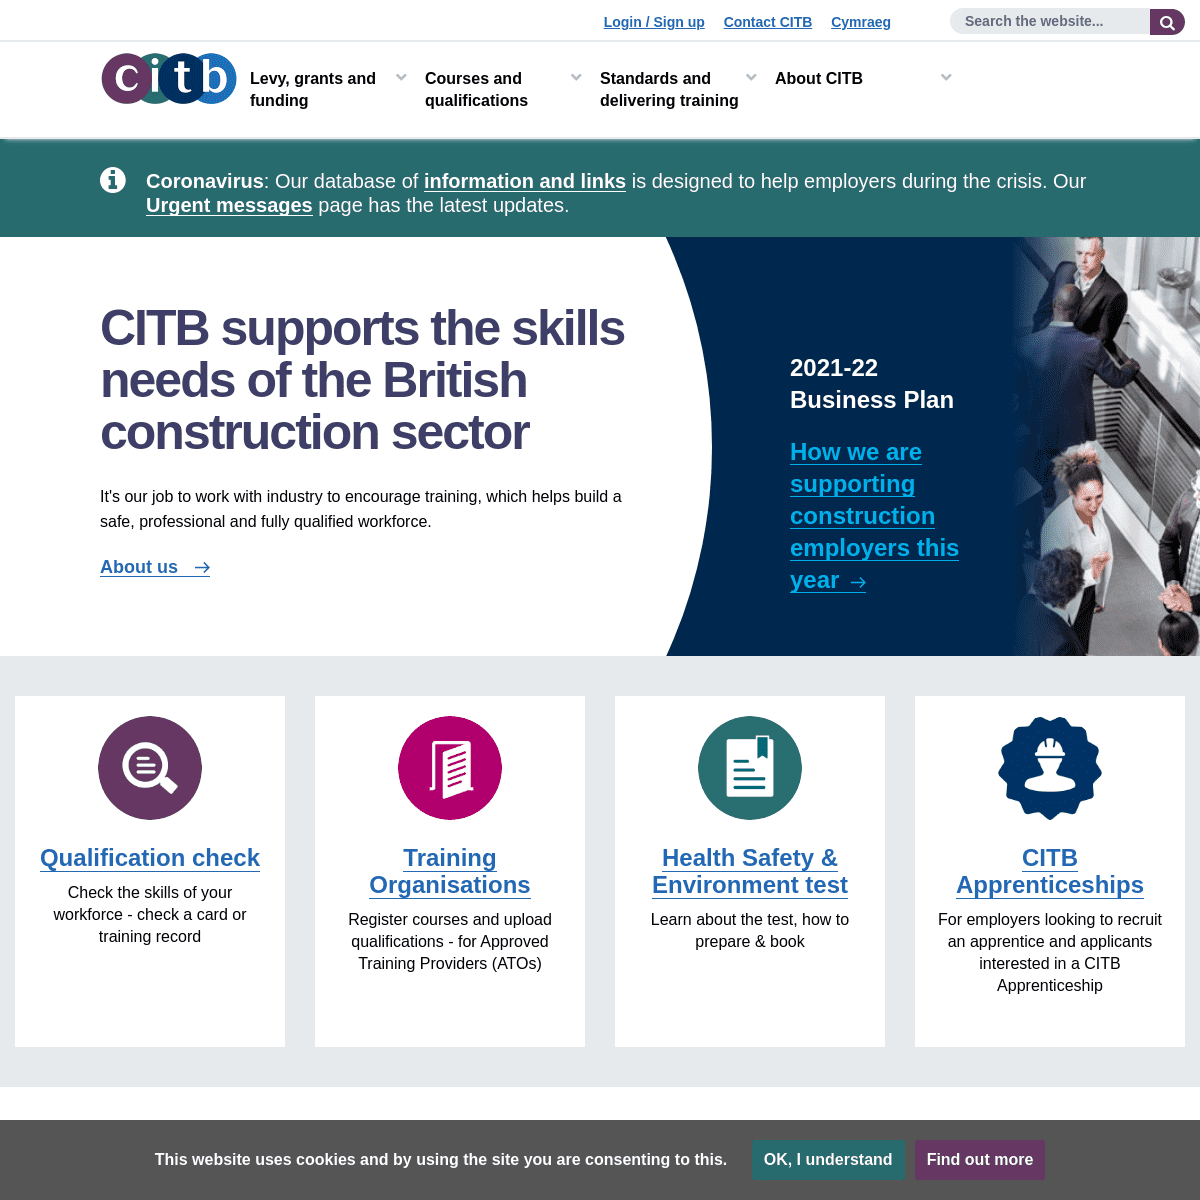 A complete backup of https://citb.co.uk